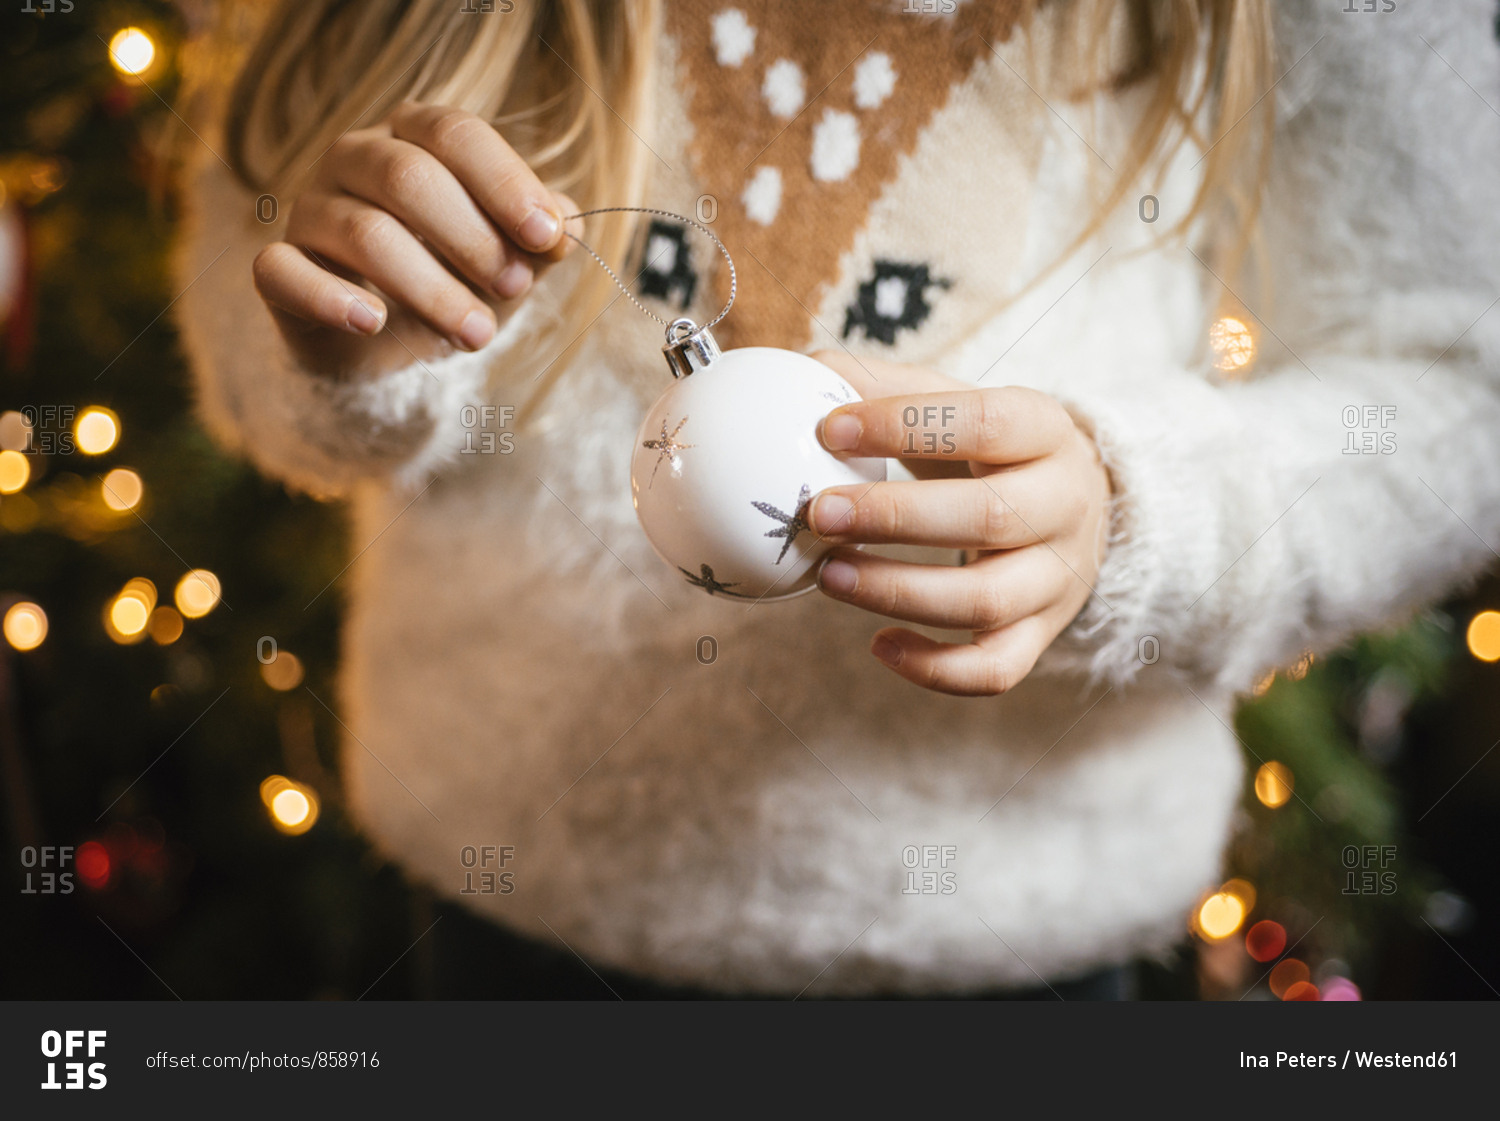 Decorating the christmas tree- girl holding a white bauble with silver stars